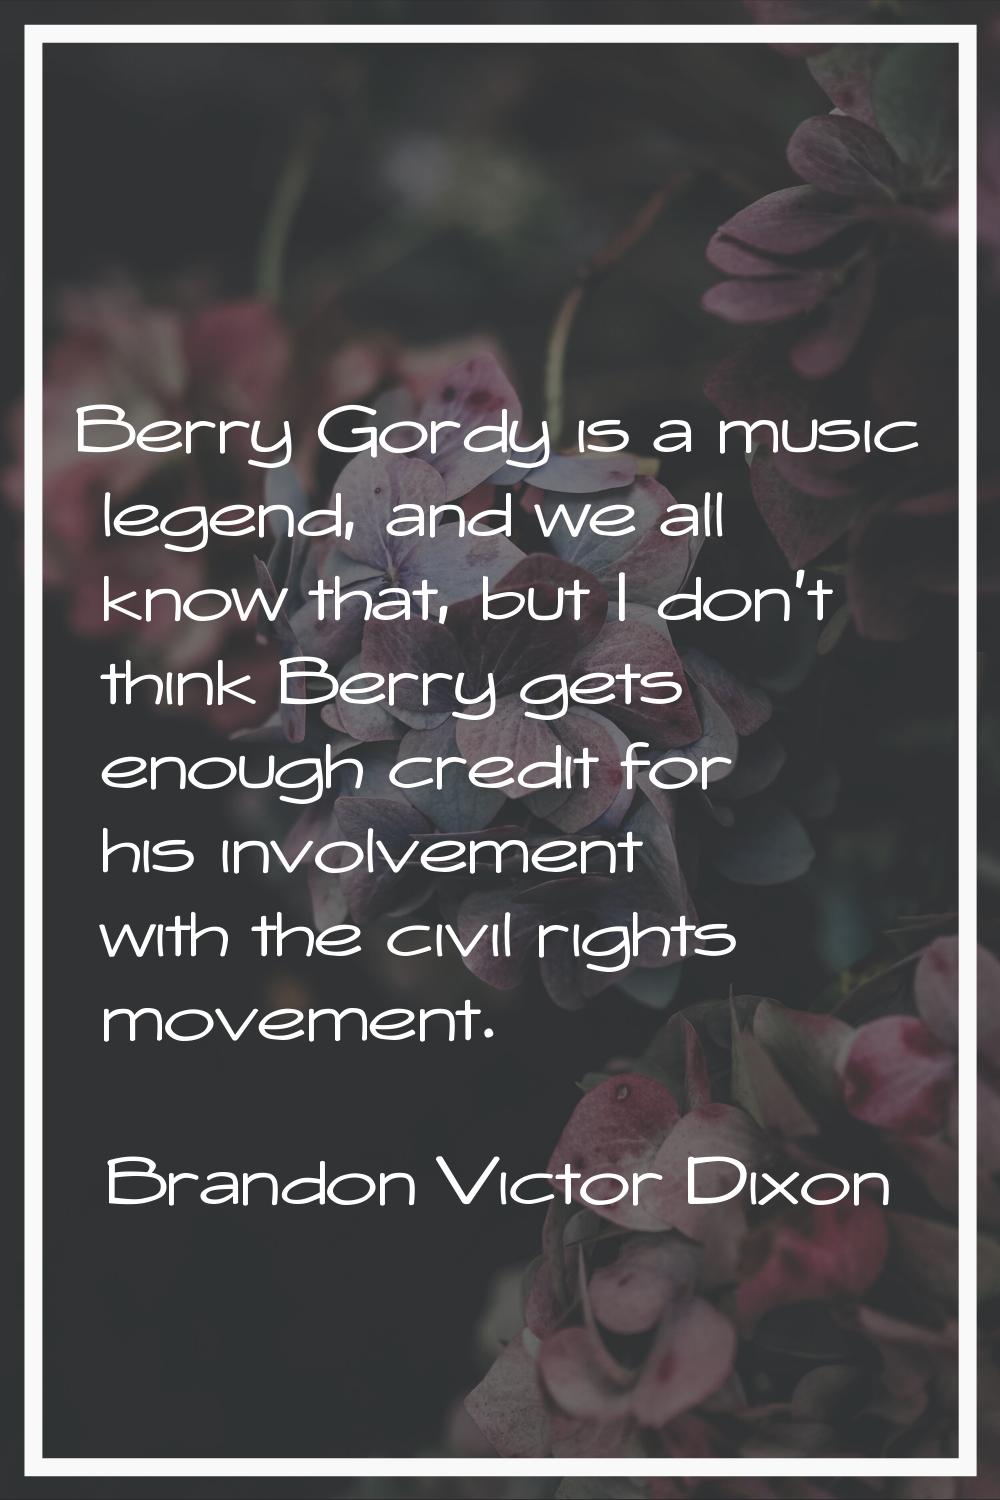 Berry Gordy is a music legend, and we all know that, but I don't think Berry gets enough credit for